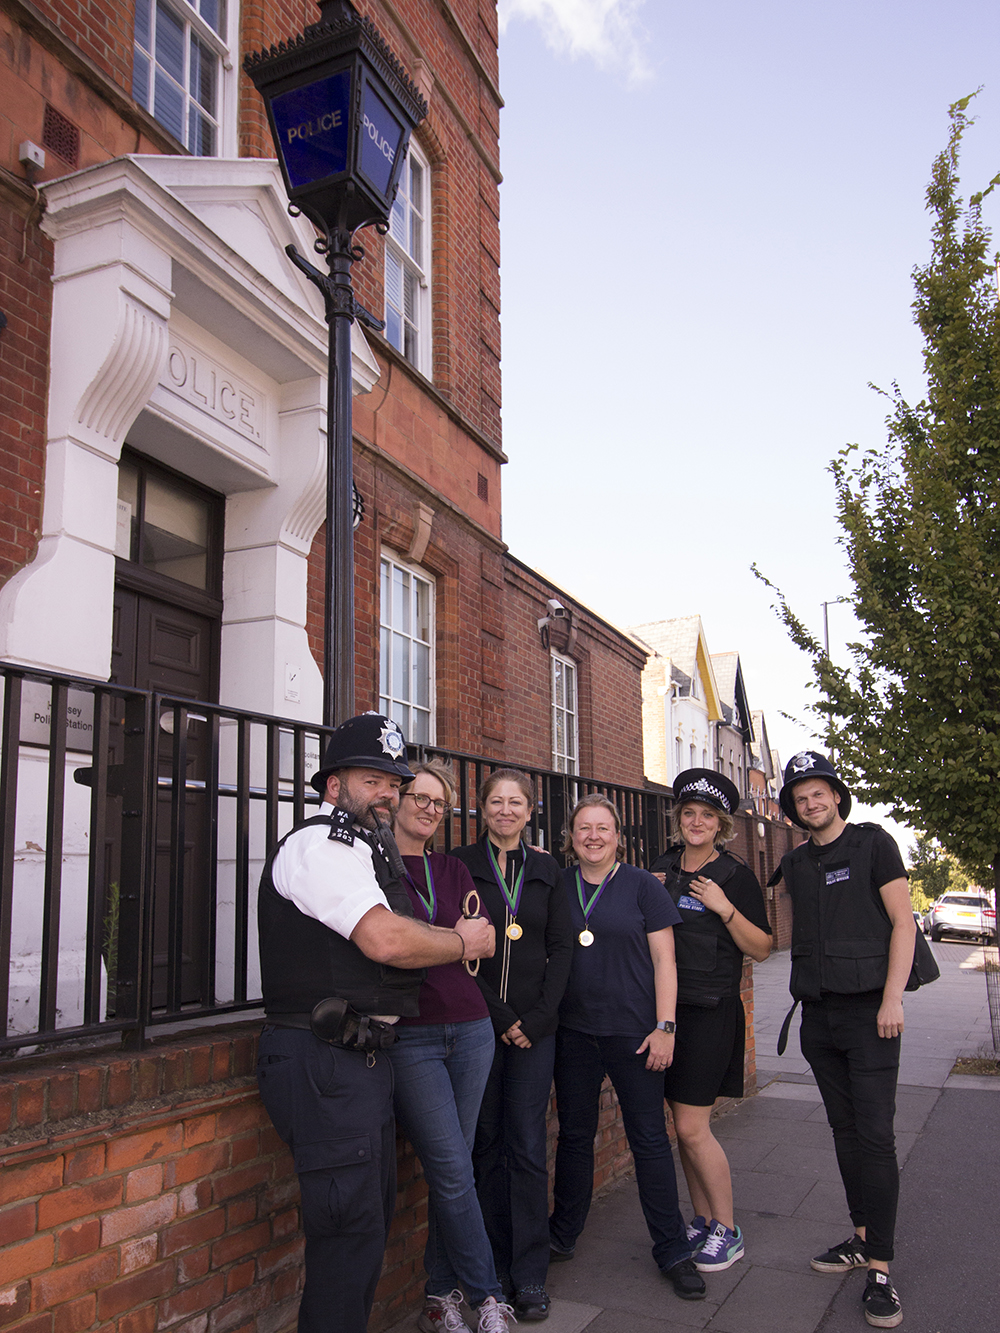 6 people are stood outside a police station, three in police costumes and three wearing medals for completing a challenge